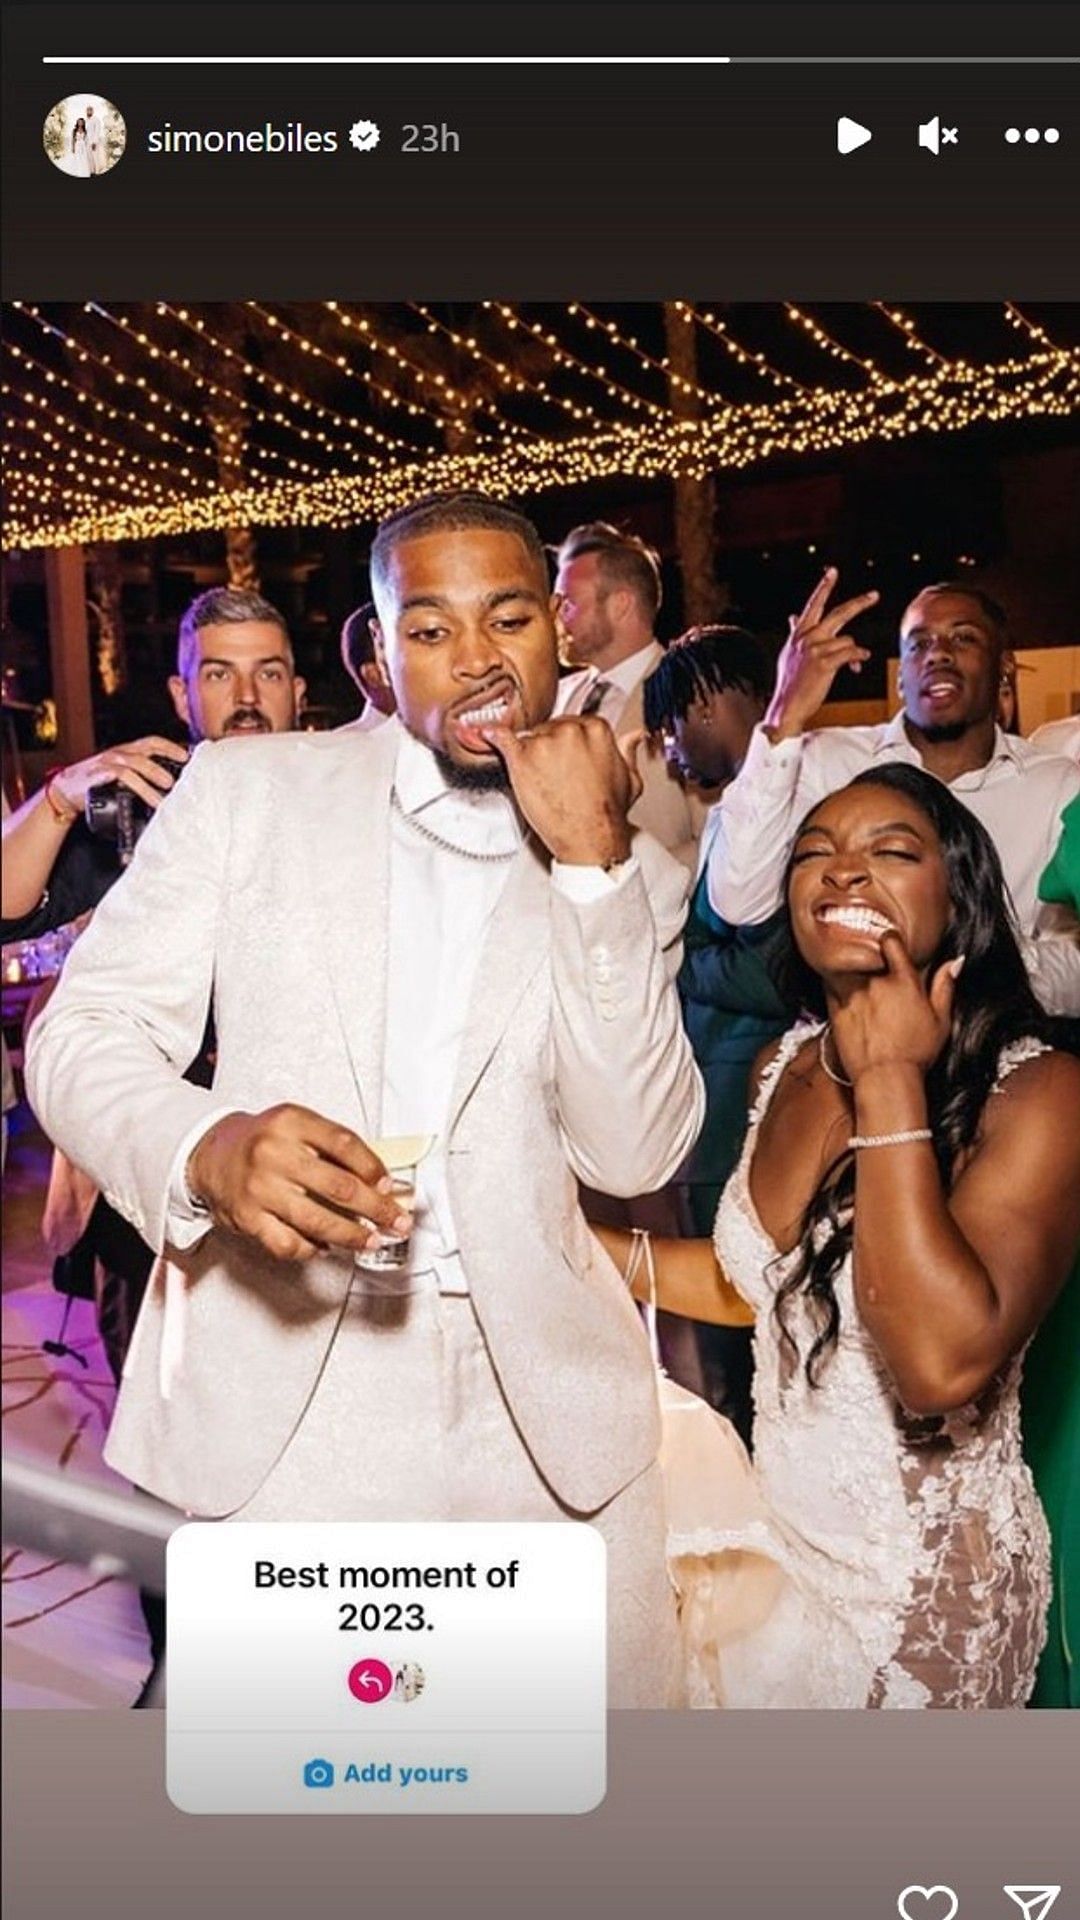 Simone Biles&#039;s favorite moment of 2023 was her wedding to Jonathan Owens.